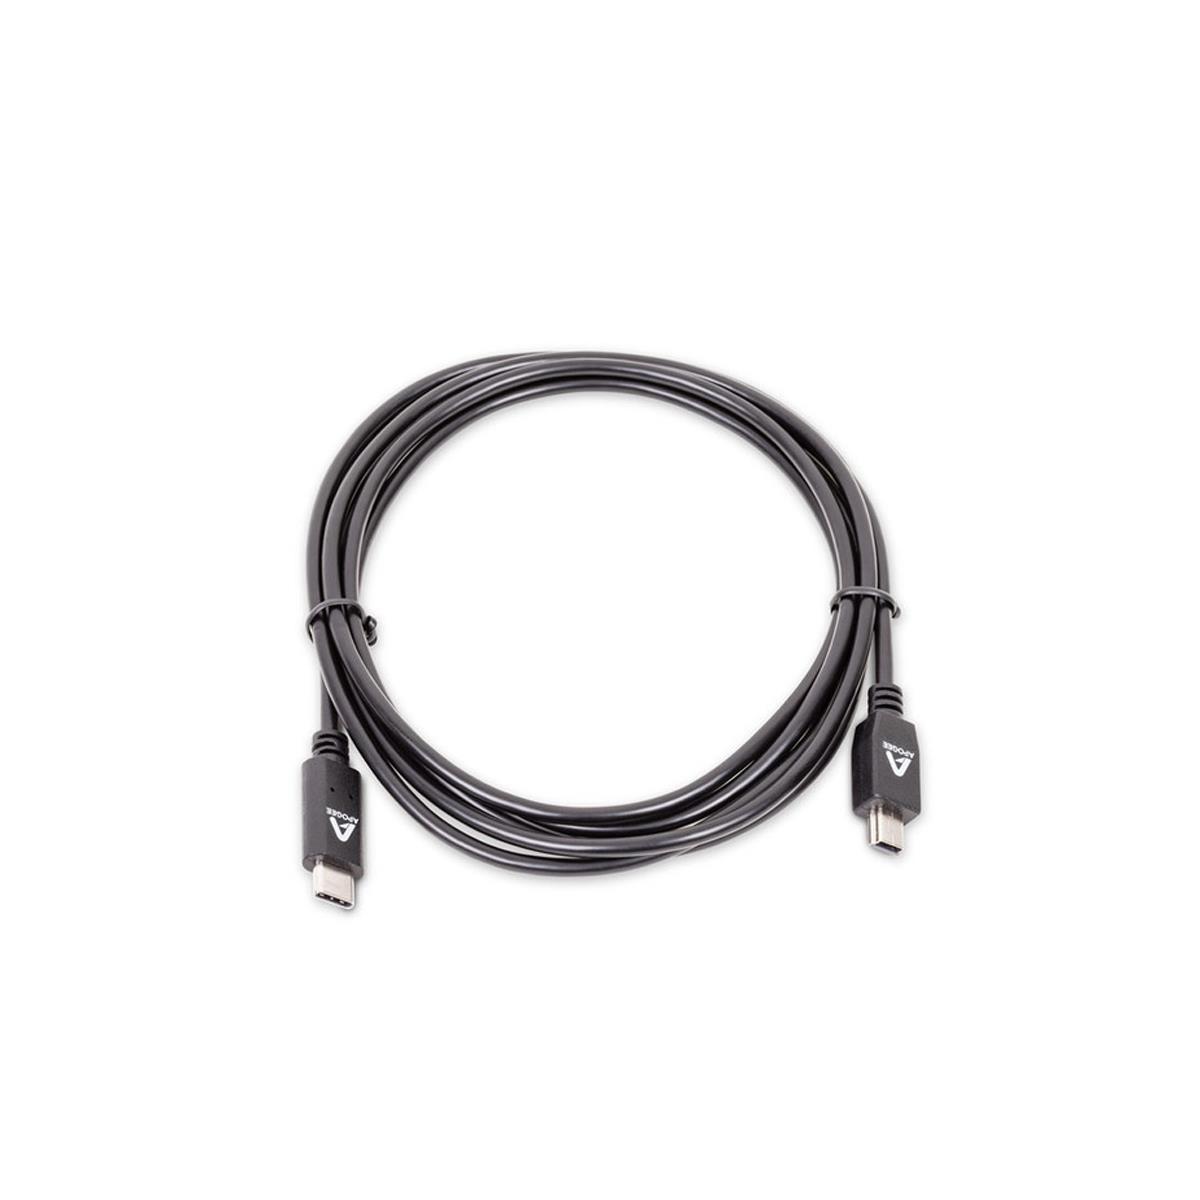 Image of Apogee Electronics 6.6' USB Mini-B to USB Type-C Cable for One